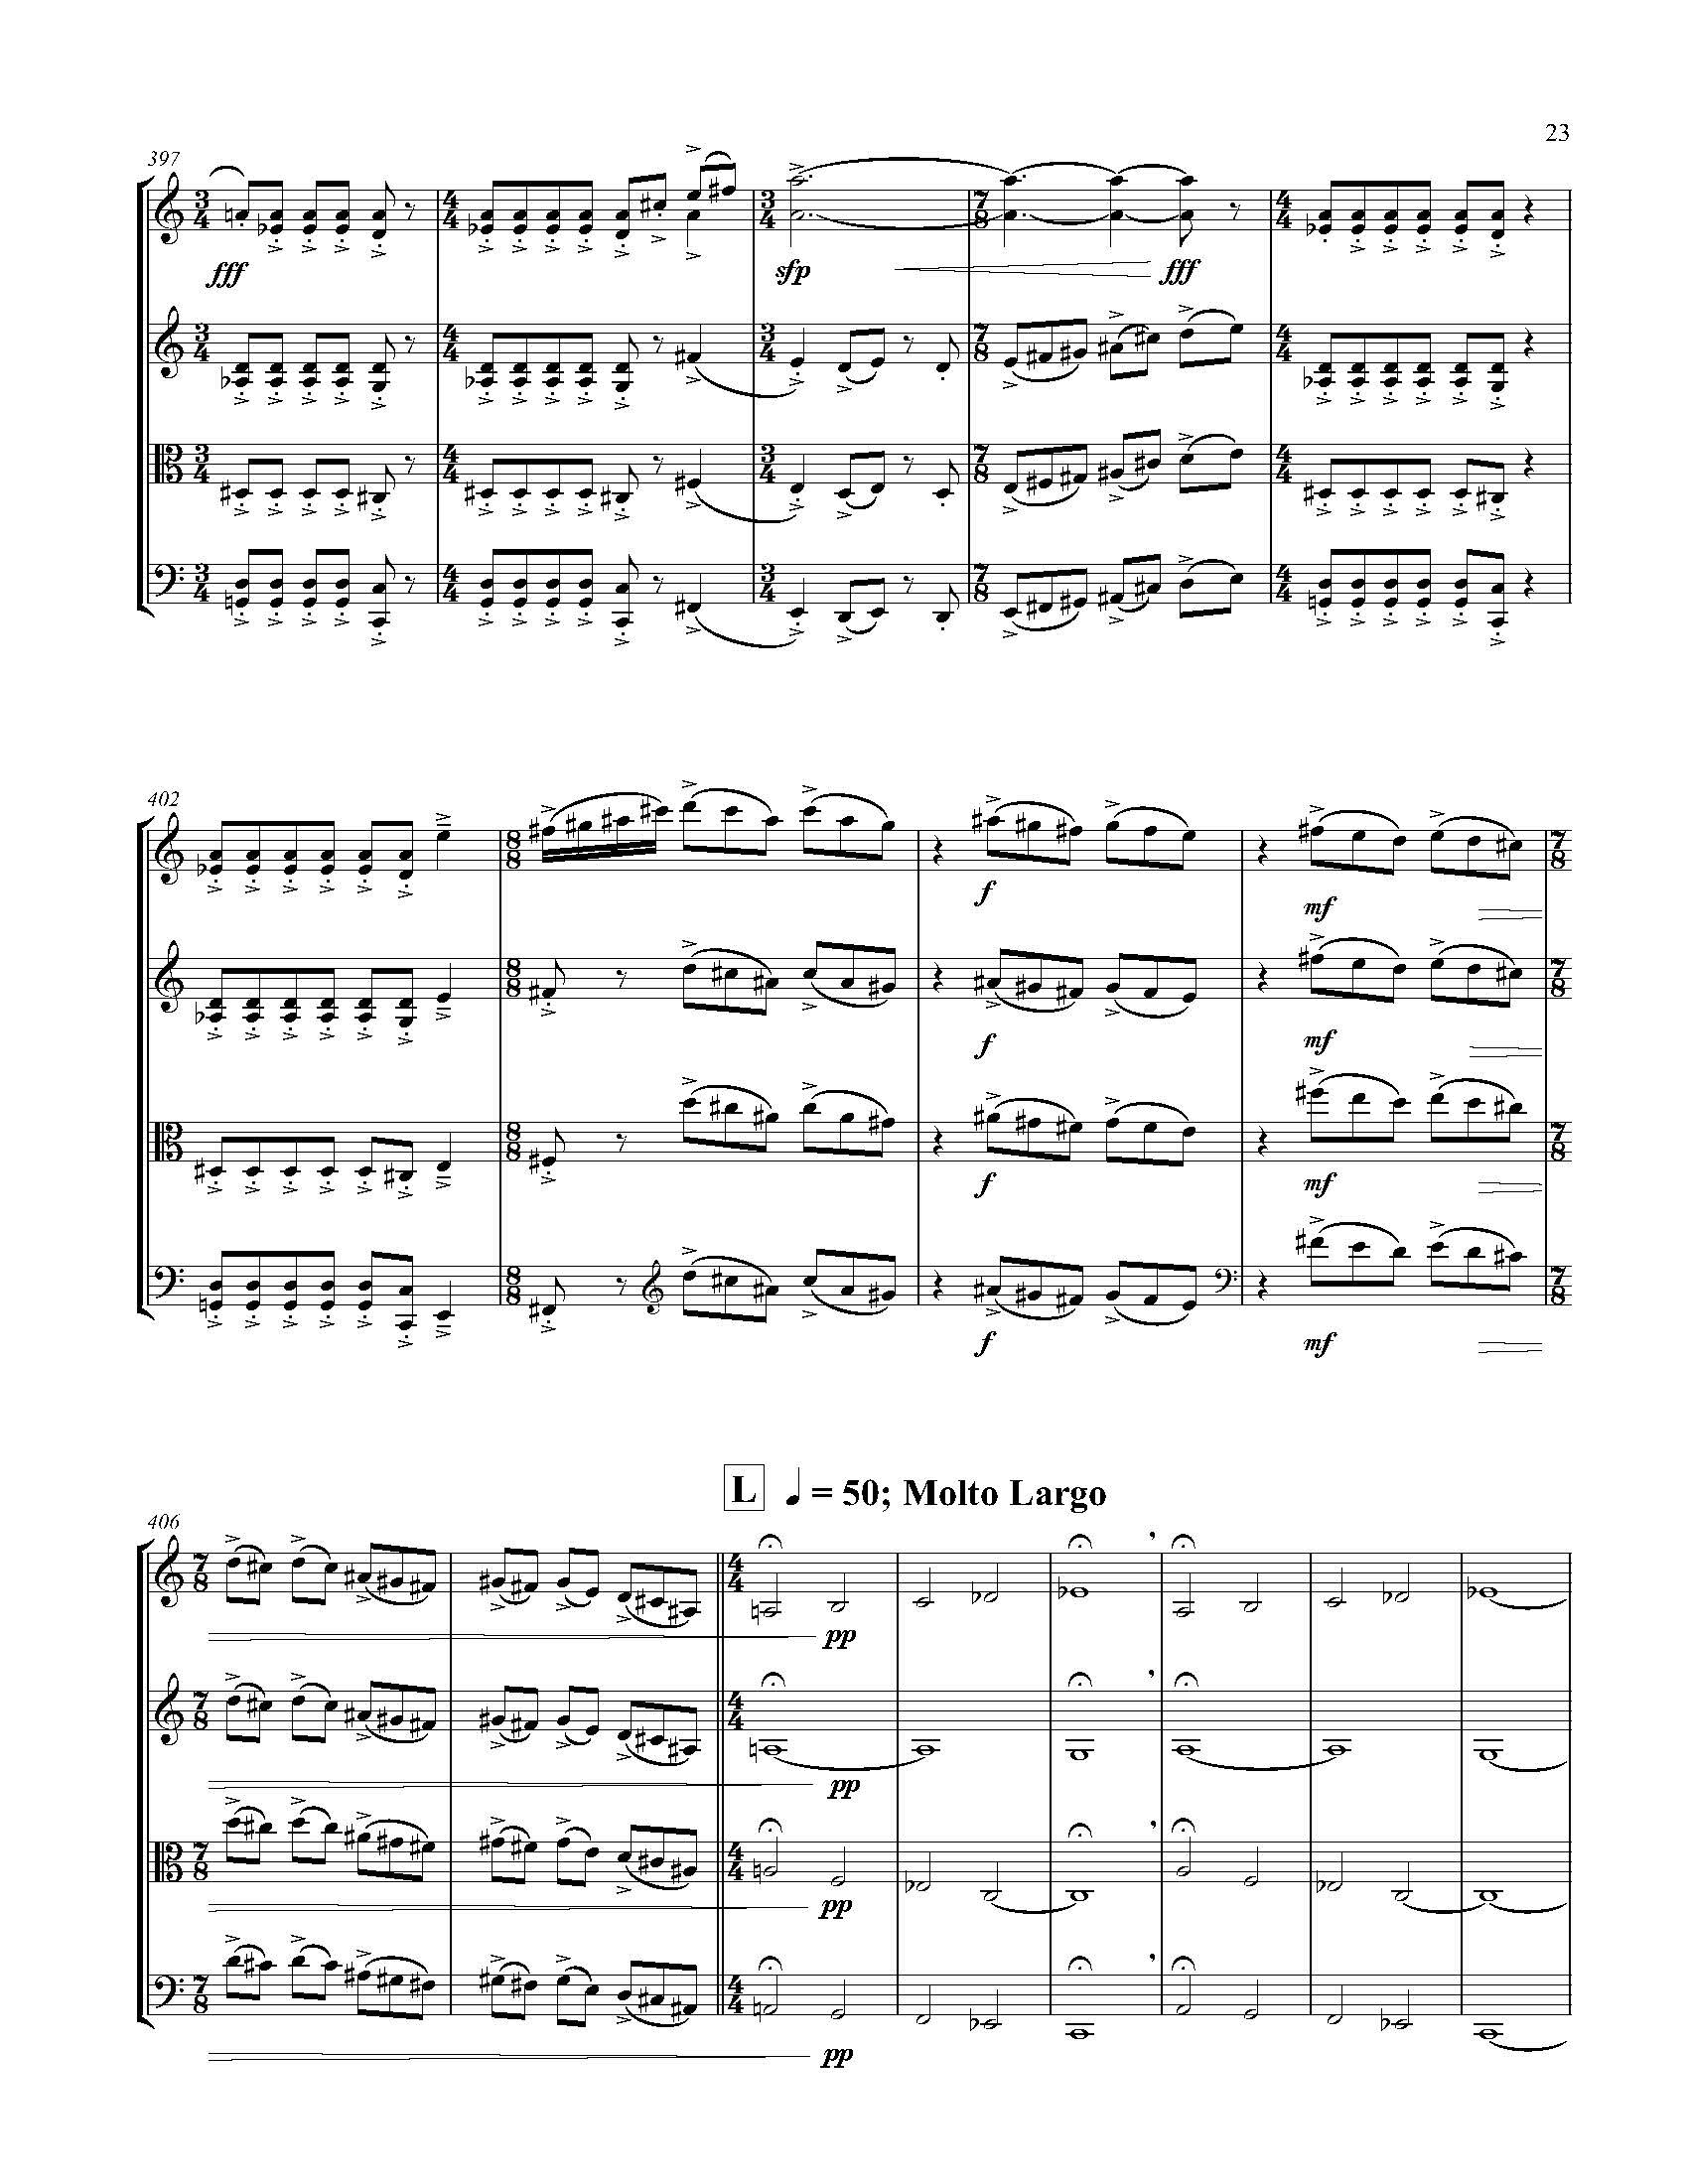 A Country of Vast Designs - Complete Score_Page_29.jpg